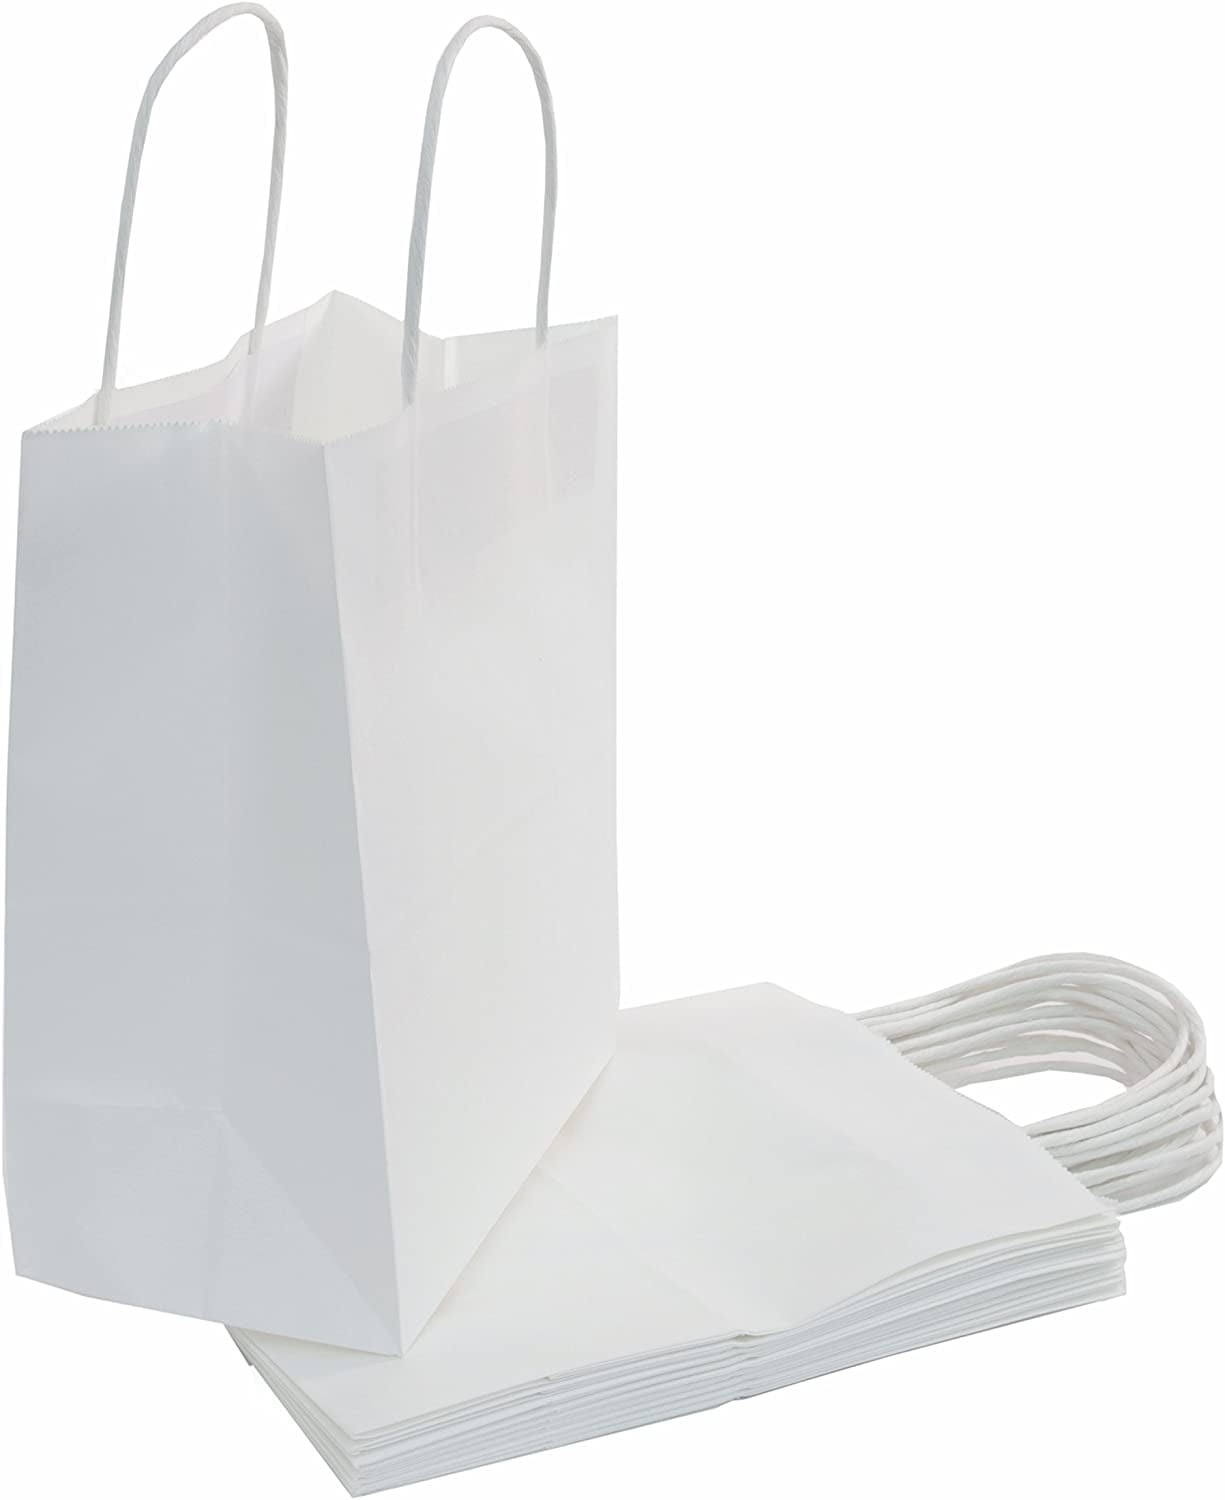 Details about   400ct White Kraft Paper Bag Party Shopping Gift Bags with Handles 8x4.75x10.5 